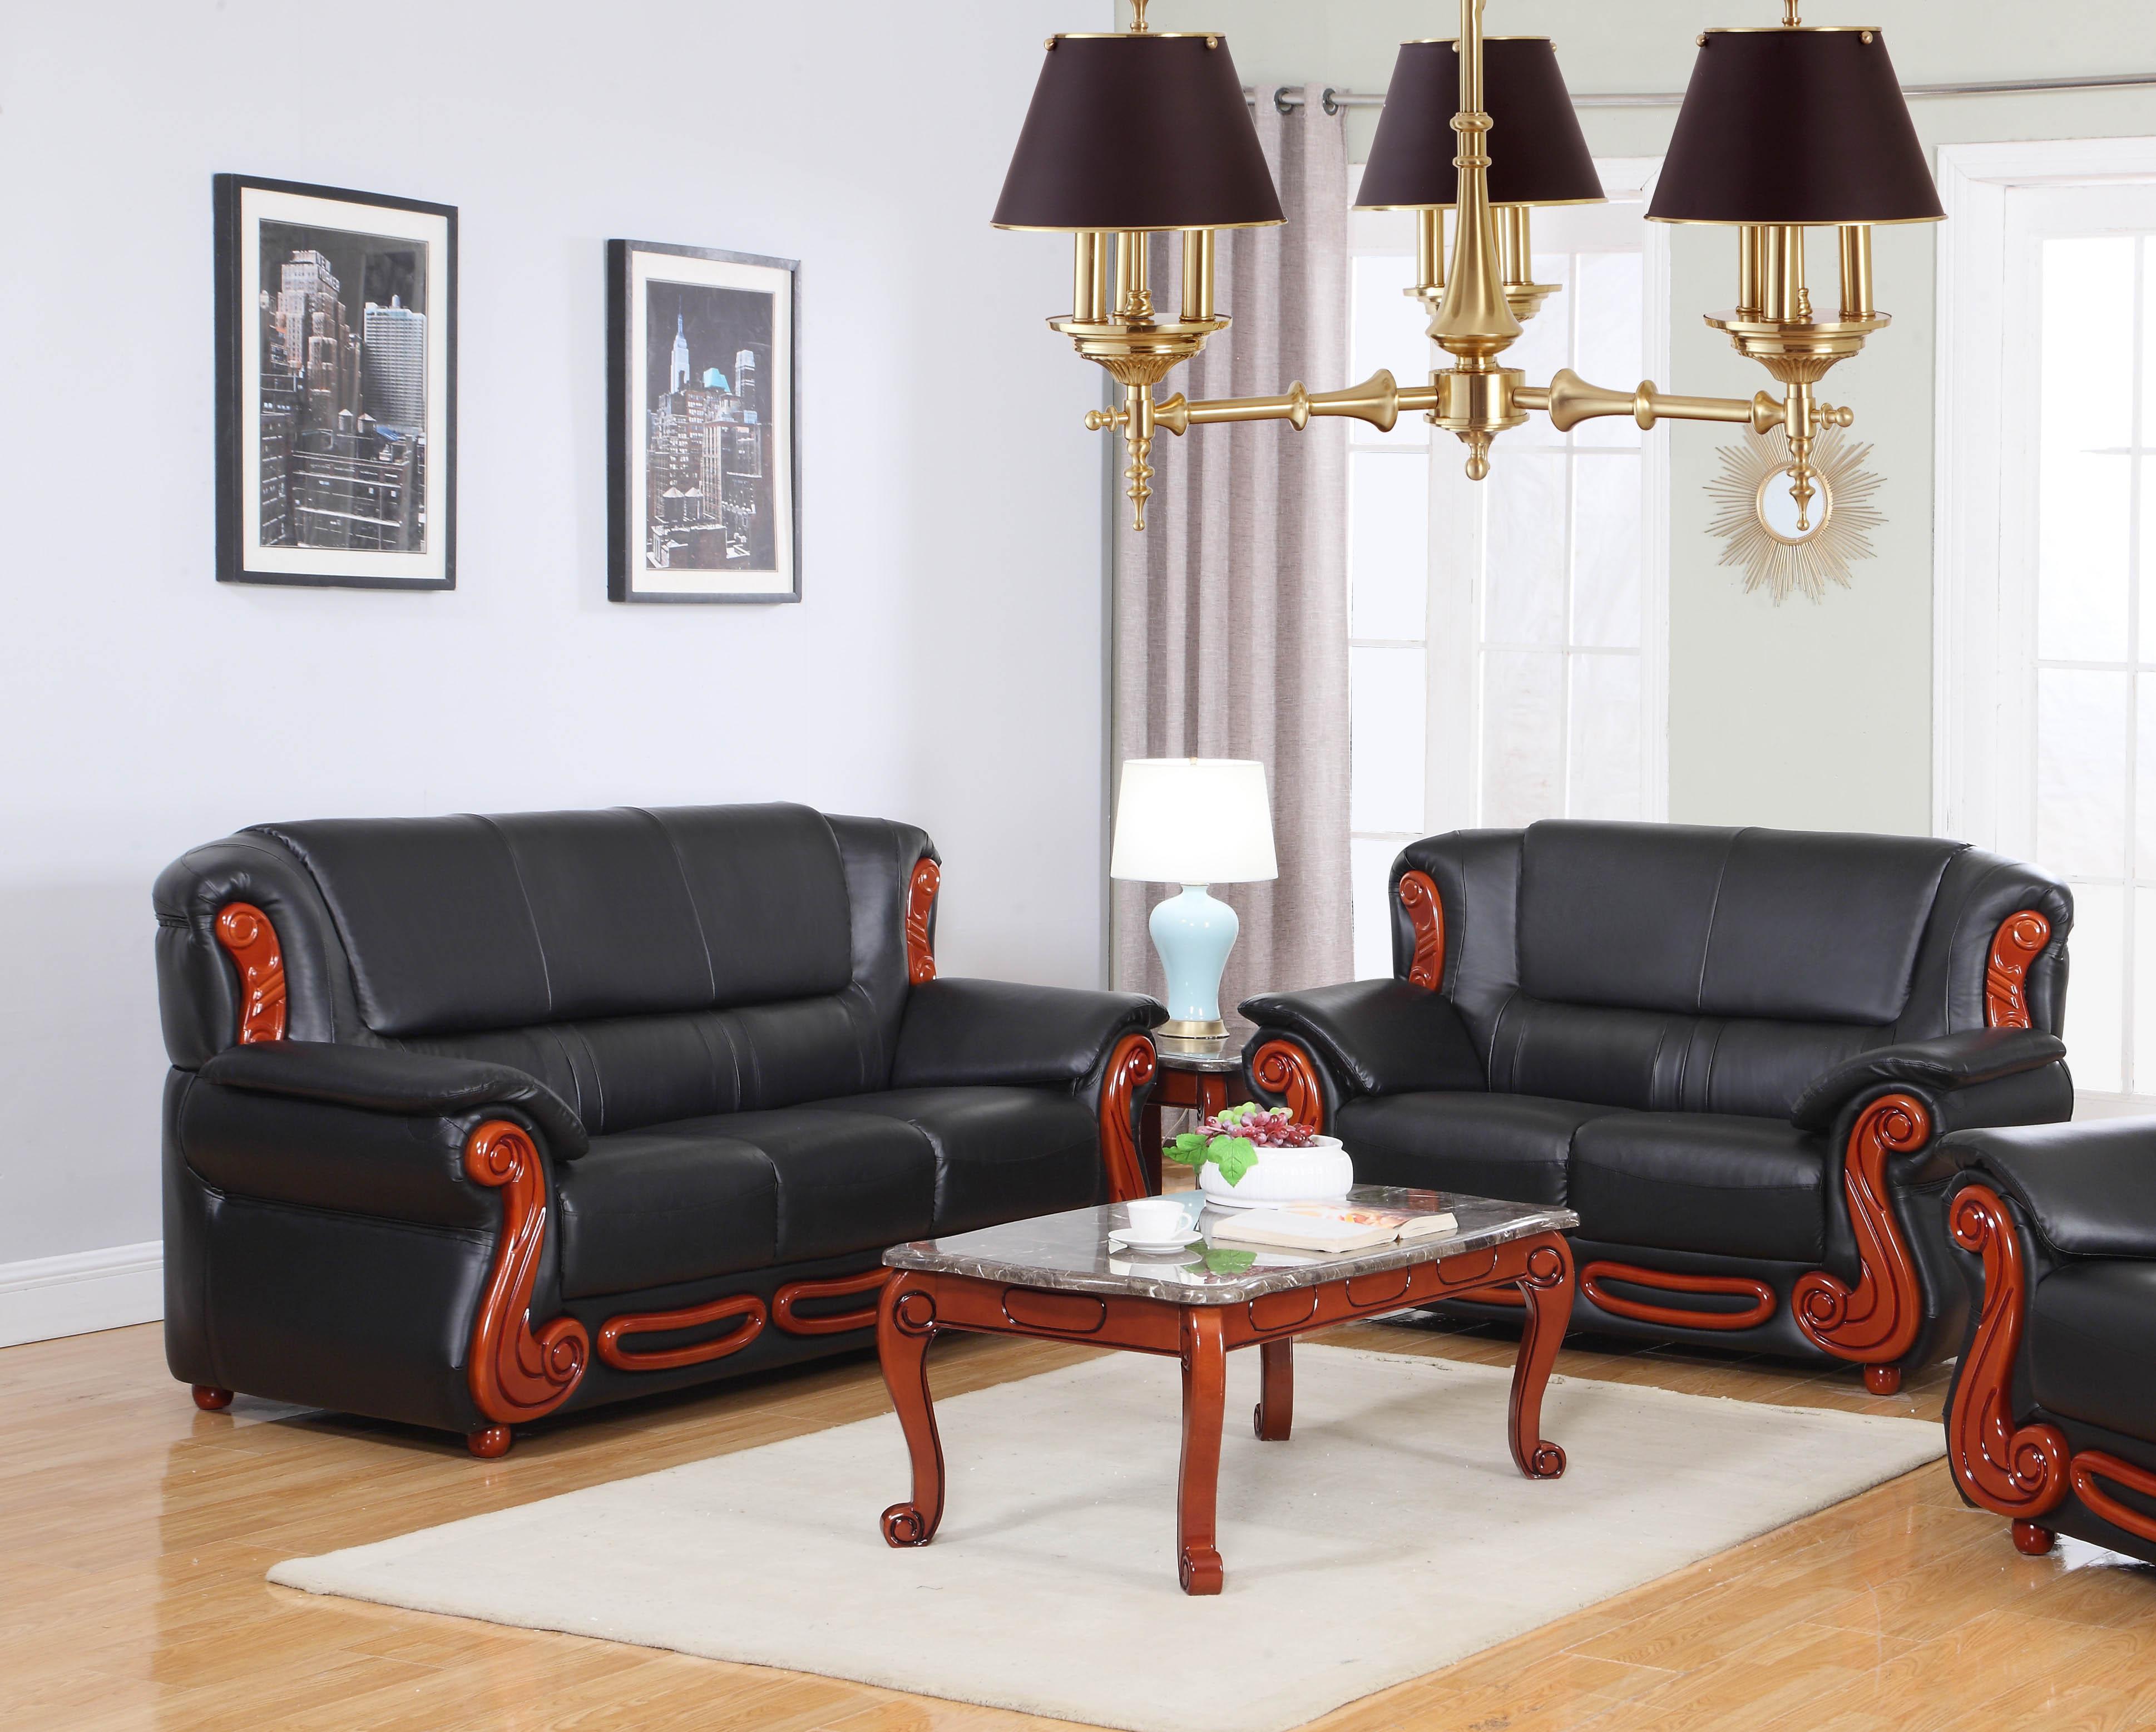 

    
Meridian 632 Bella Black Bonded Leather Living Room Set 2Ps Traditional Classic
